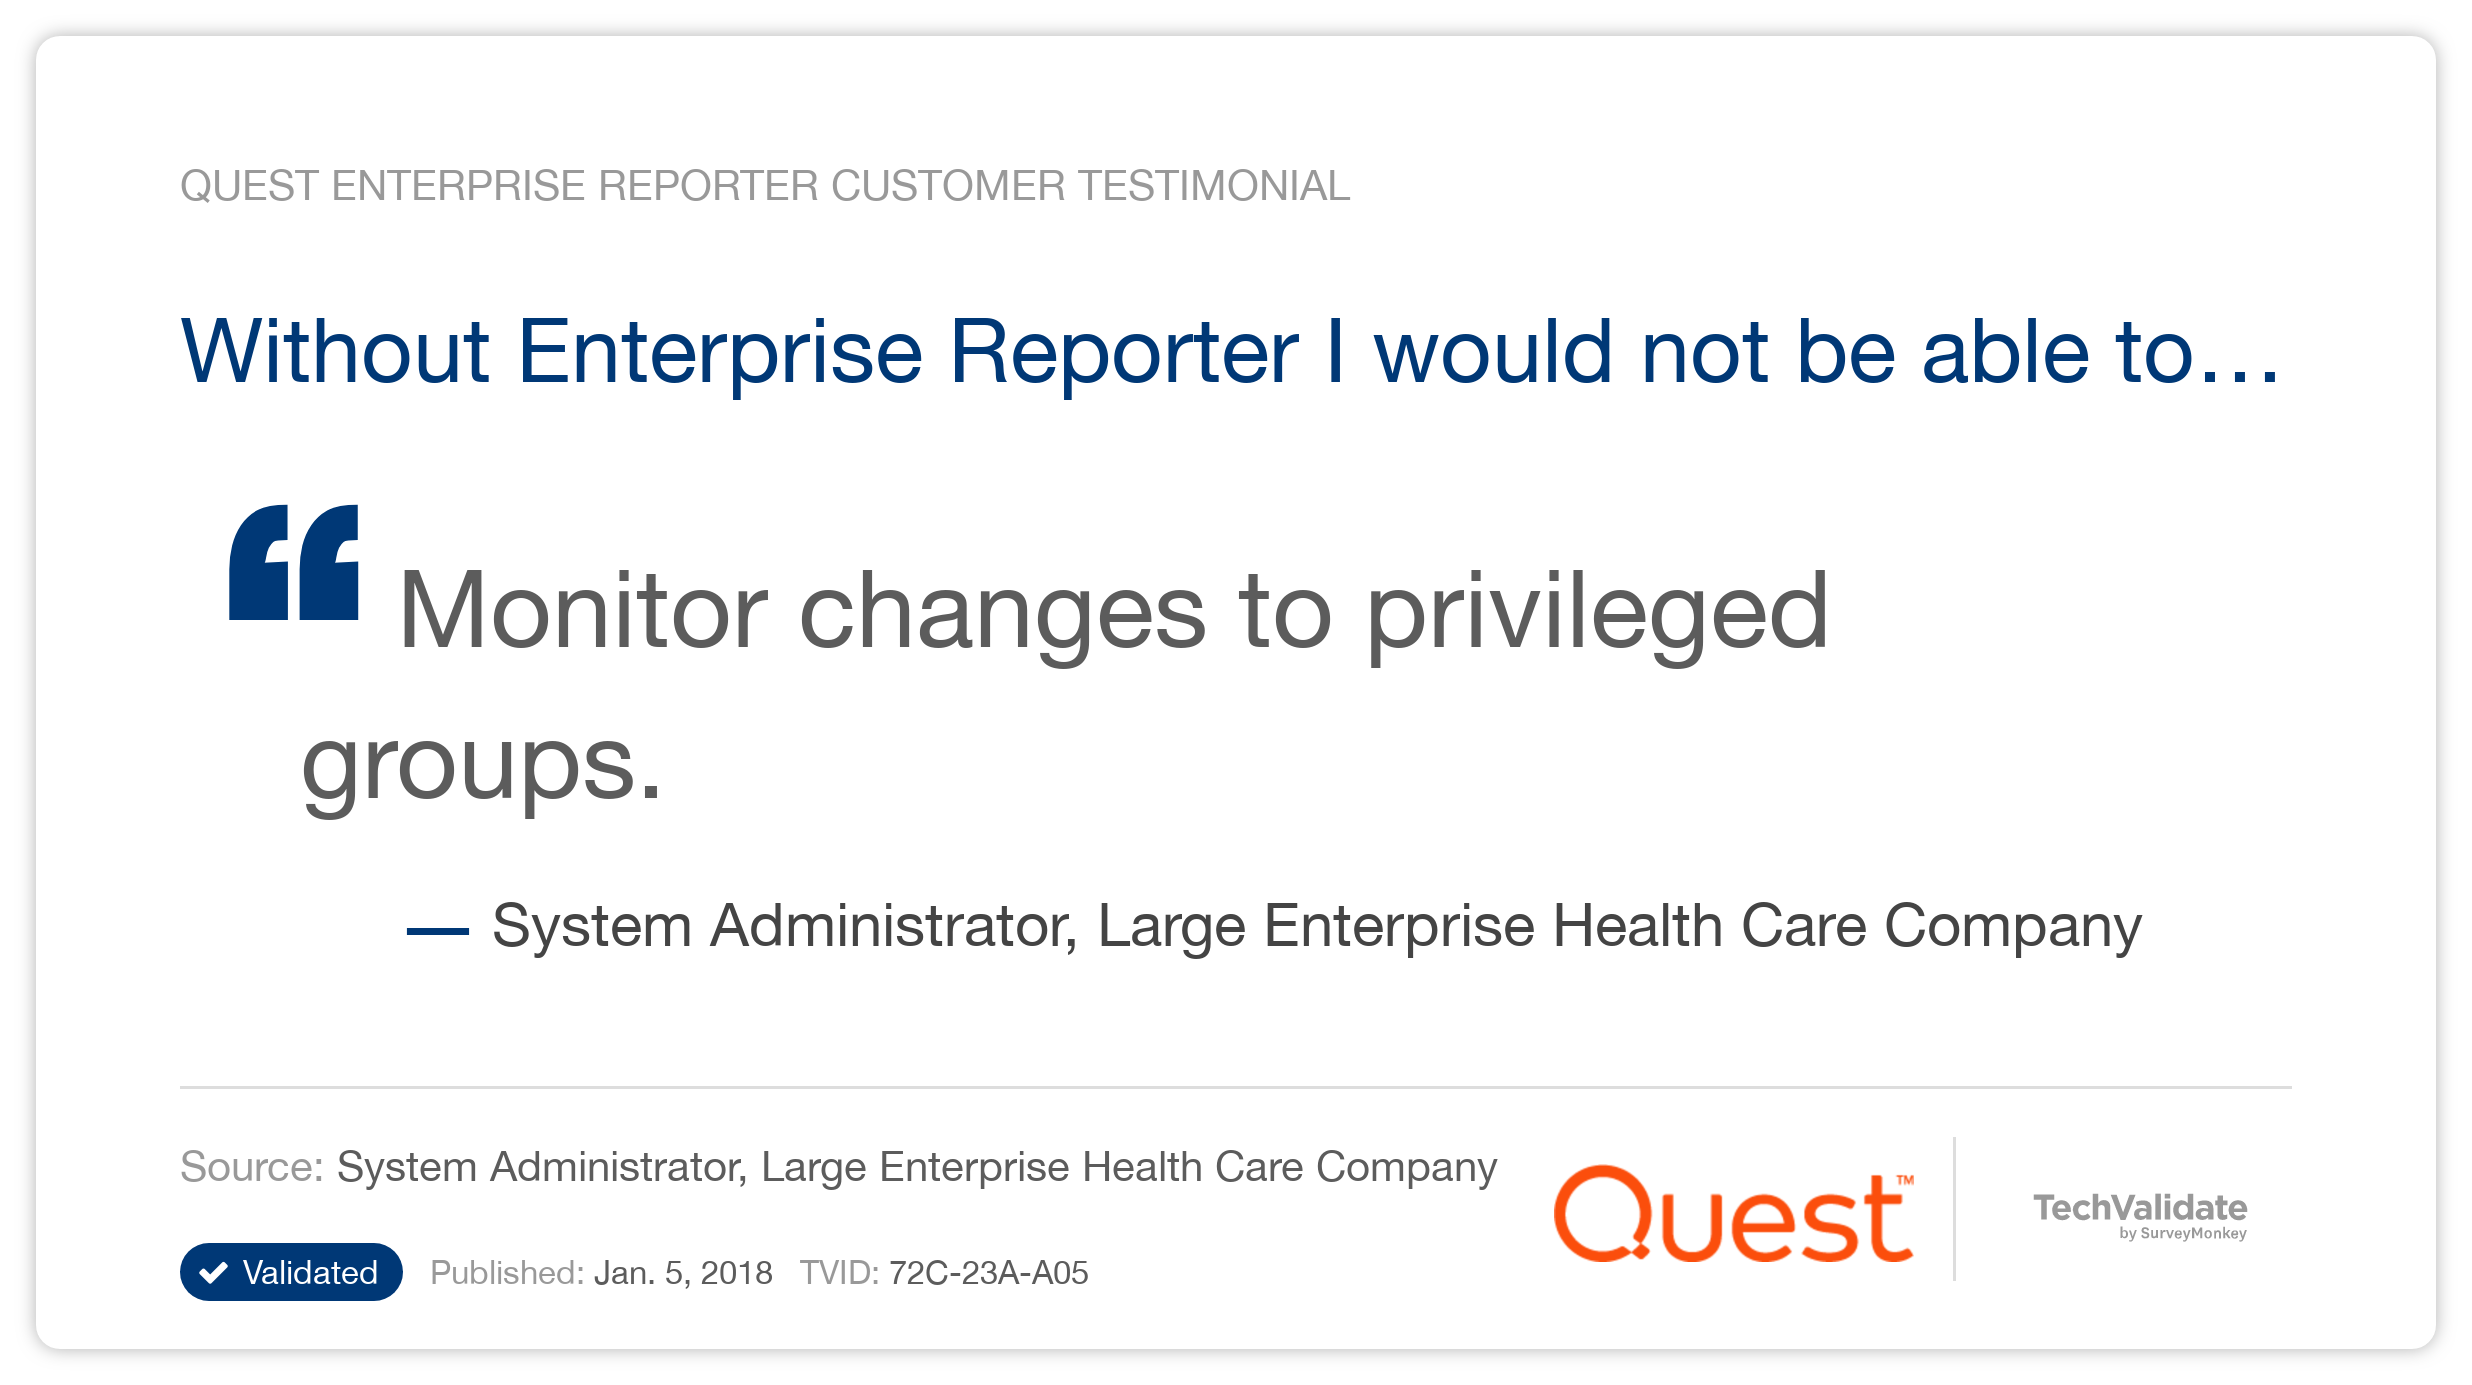 Without Enterprise Reporter I would not be able to...